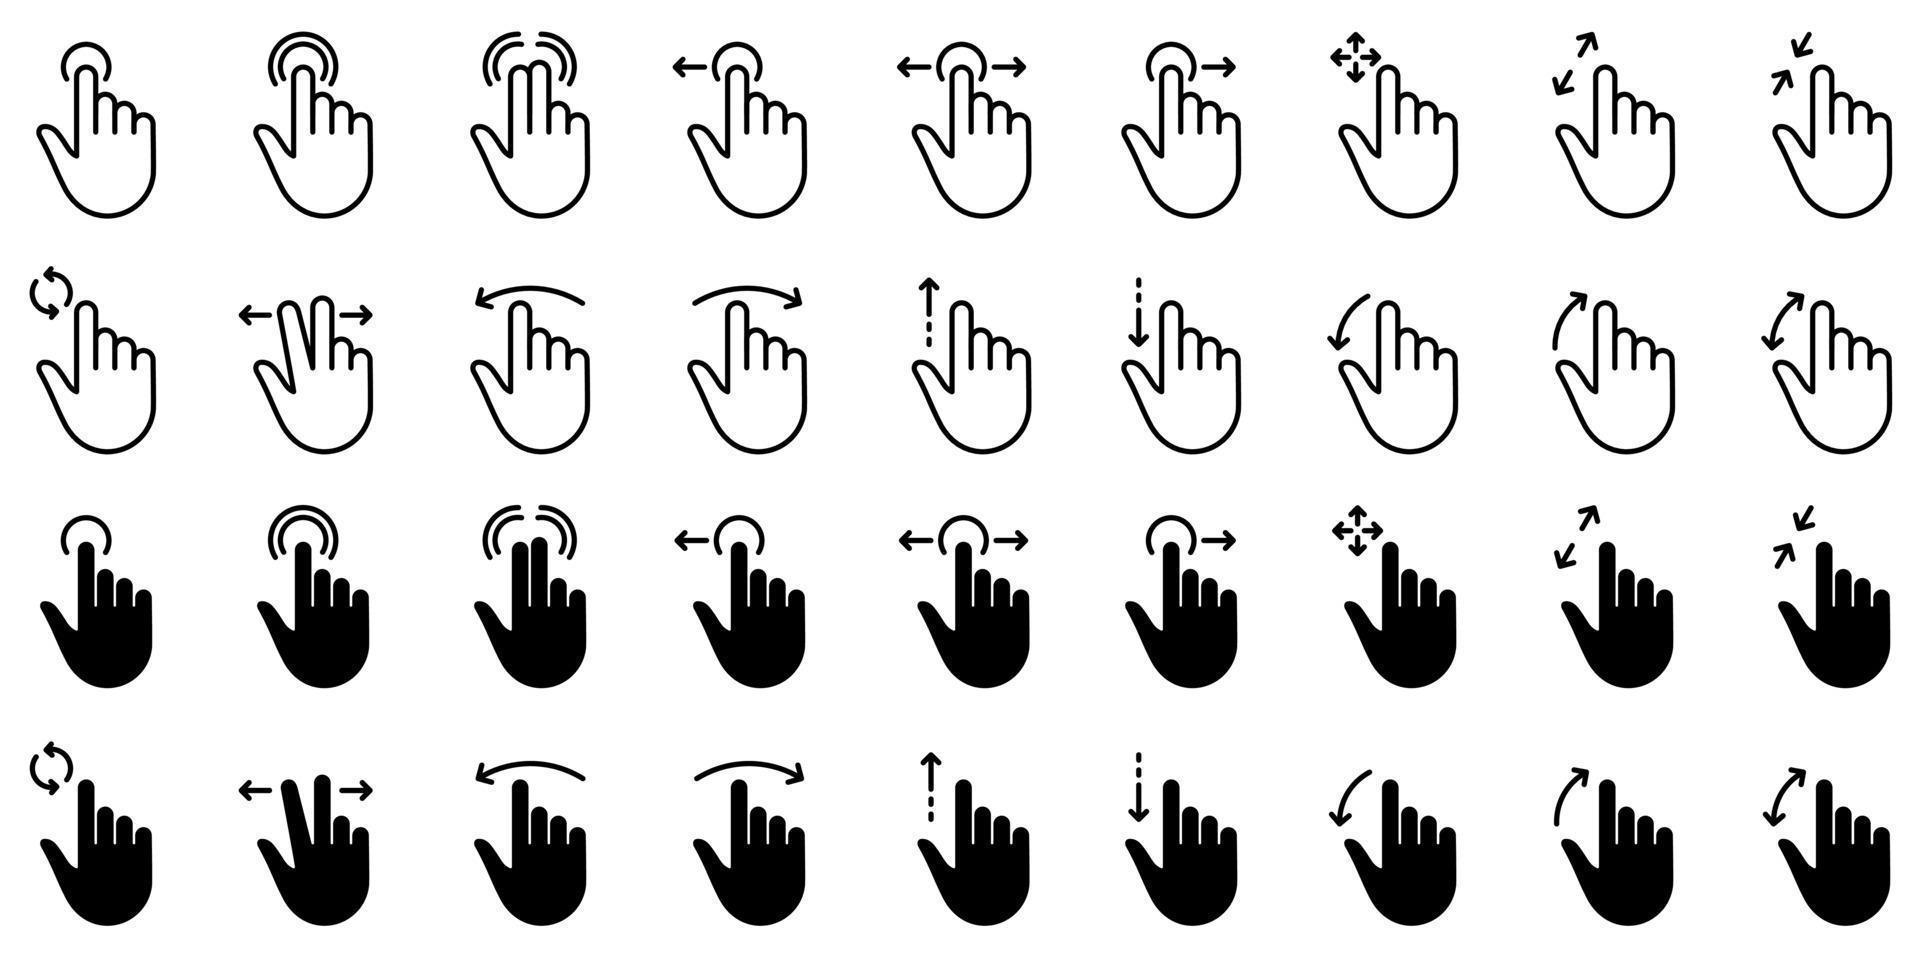 Gesture Tap Line and Silhouette Icon Set. Swipe Hand Finger Touch and Drag Linear, Glyph Pictogram. Pinch Screen, Rotate Up Down on Screen Outline Icon. Gesture Slide. Isolated Vector Illustration.